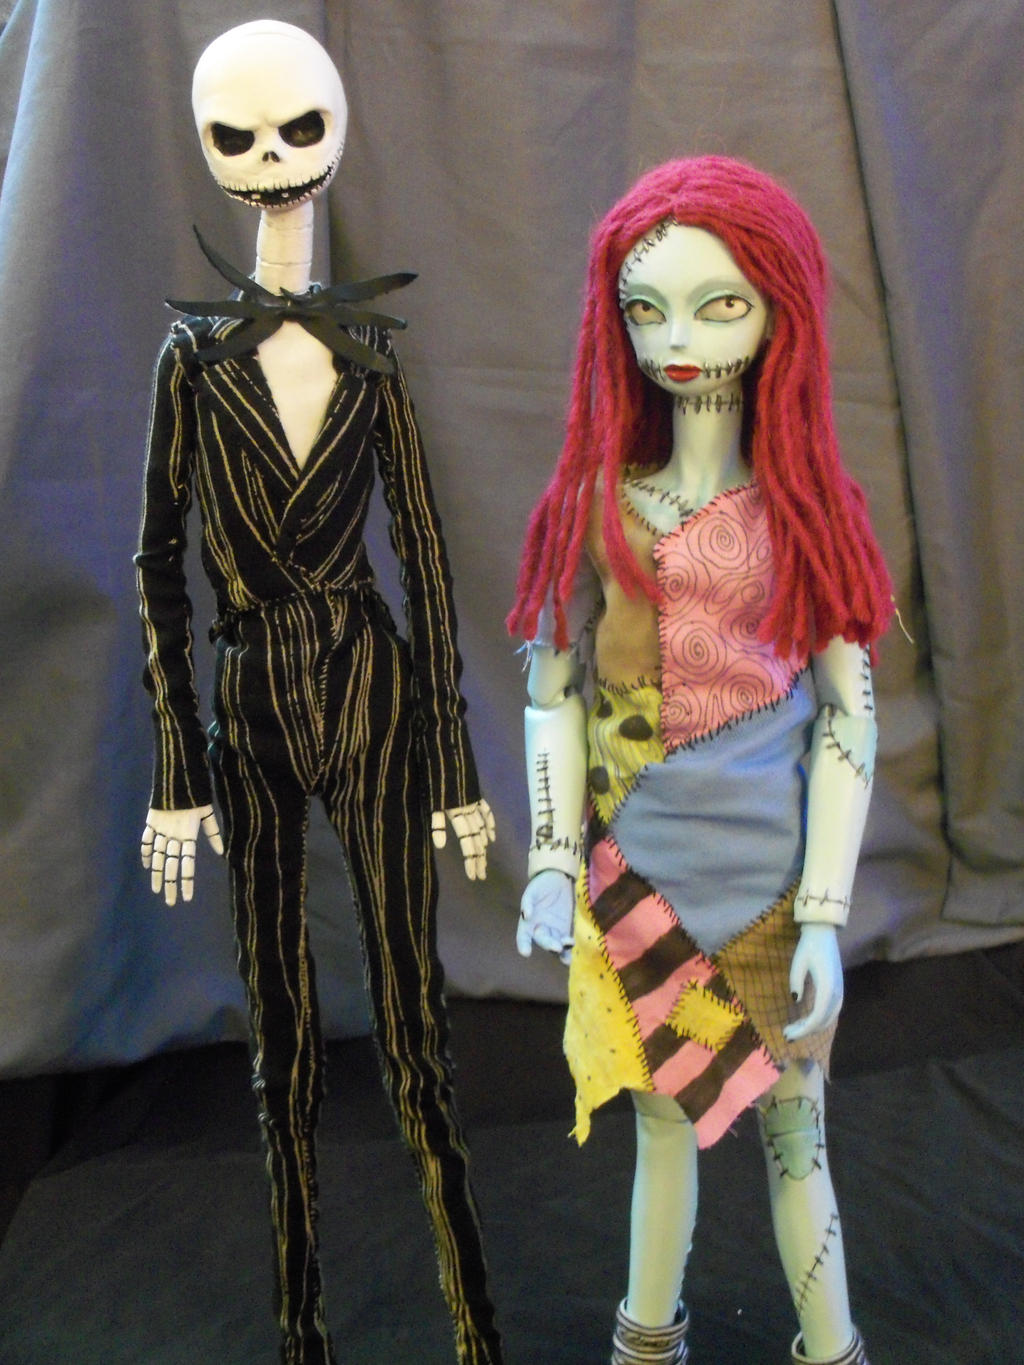 FOR SALE: Jack and Sally BJD pair by mourningwake-press on DeviantArt